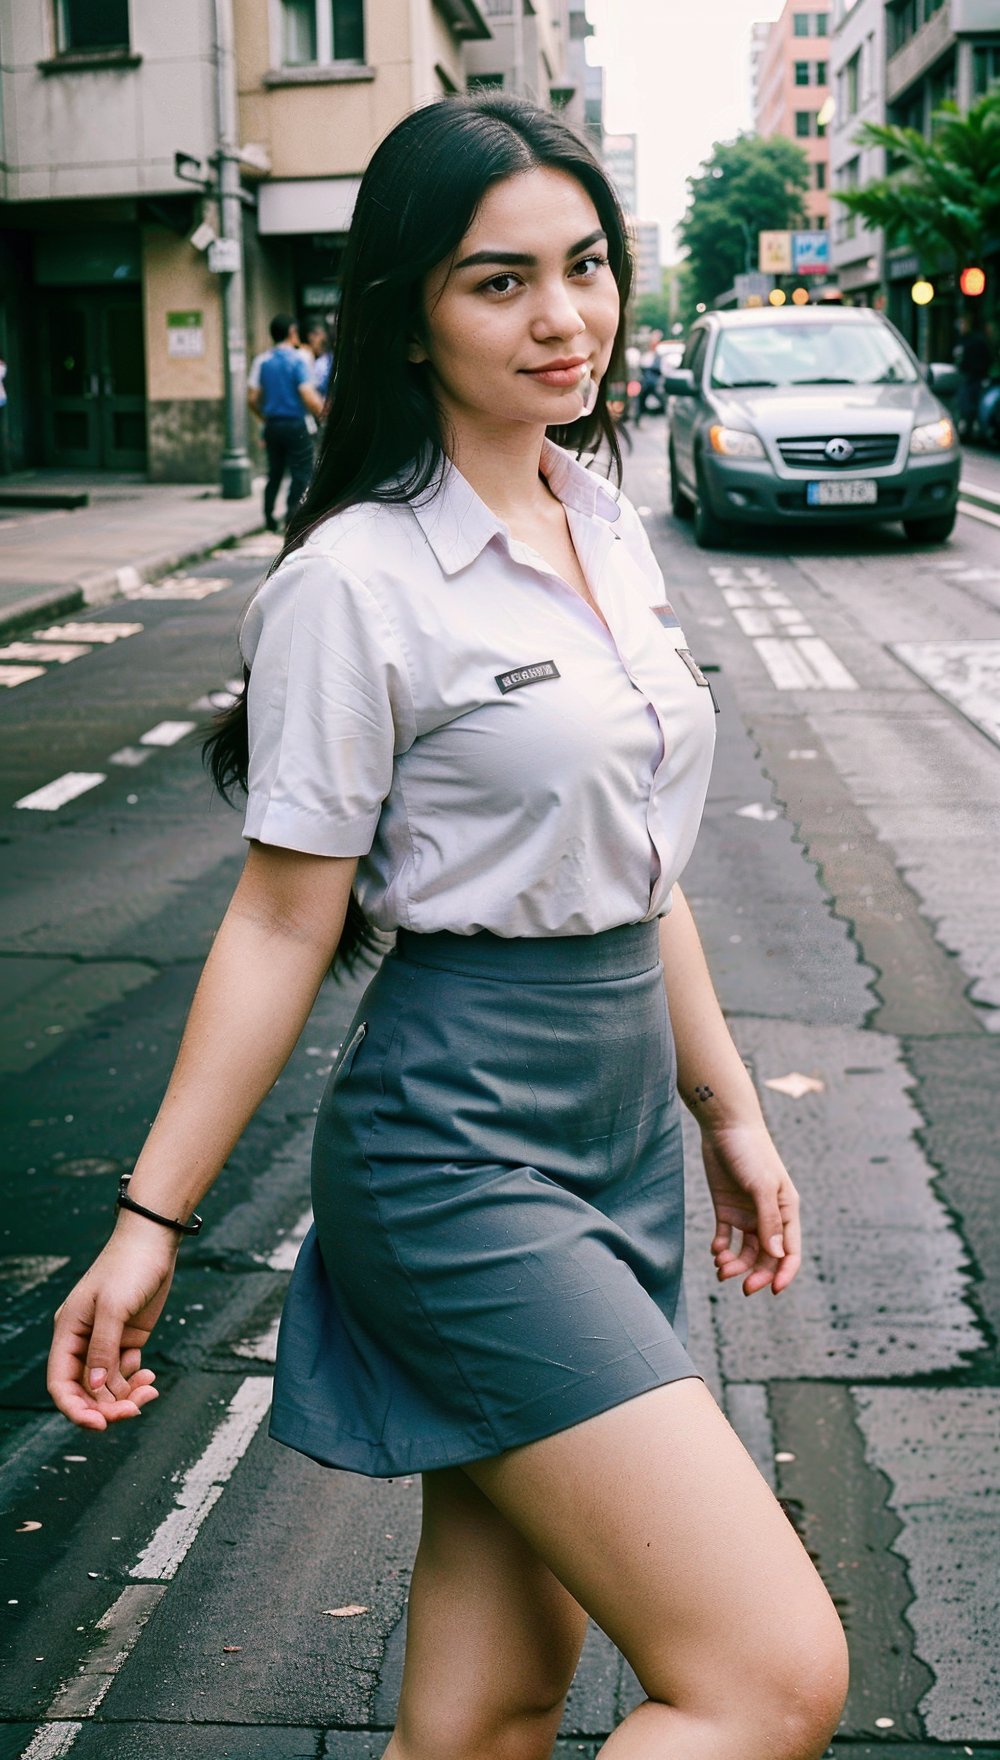 Beautiful woman with long brown hair, 18 years old, well-built, has a mole above her lip, ideally wearing a high school uniform, short-sleeved white shirt, long gray skirt past her knees, not too big chest, walking in the middle. city. buzz, sharp looks, high quality photography, street cinema